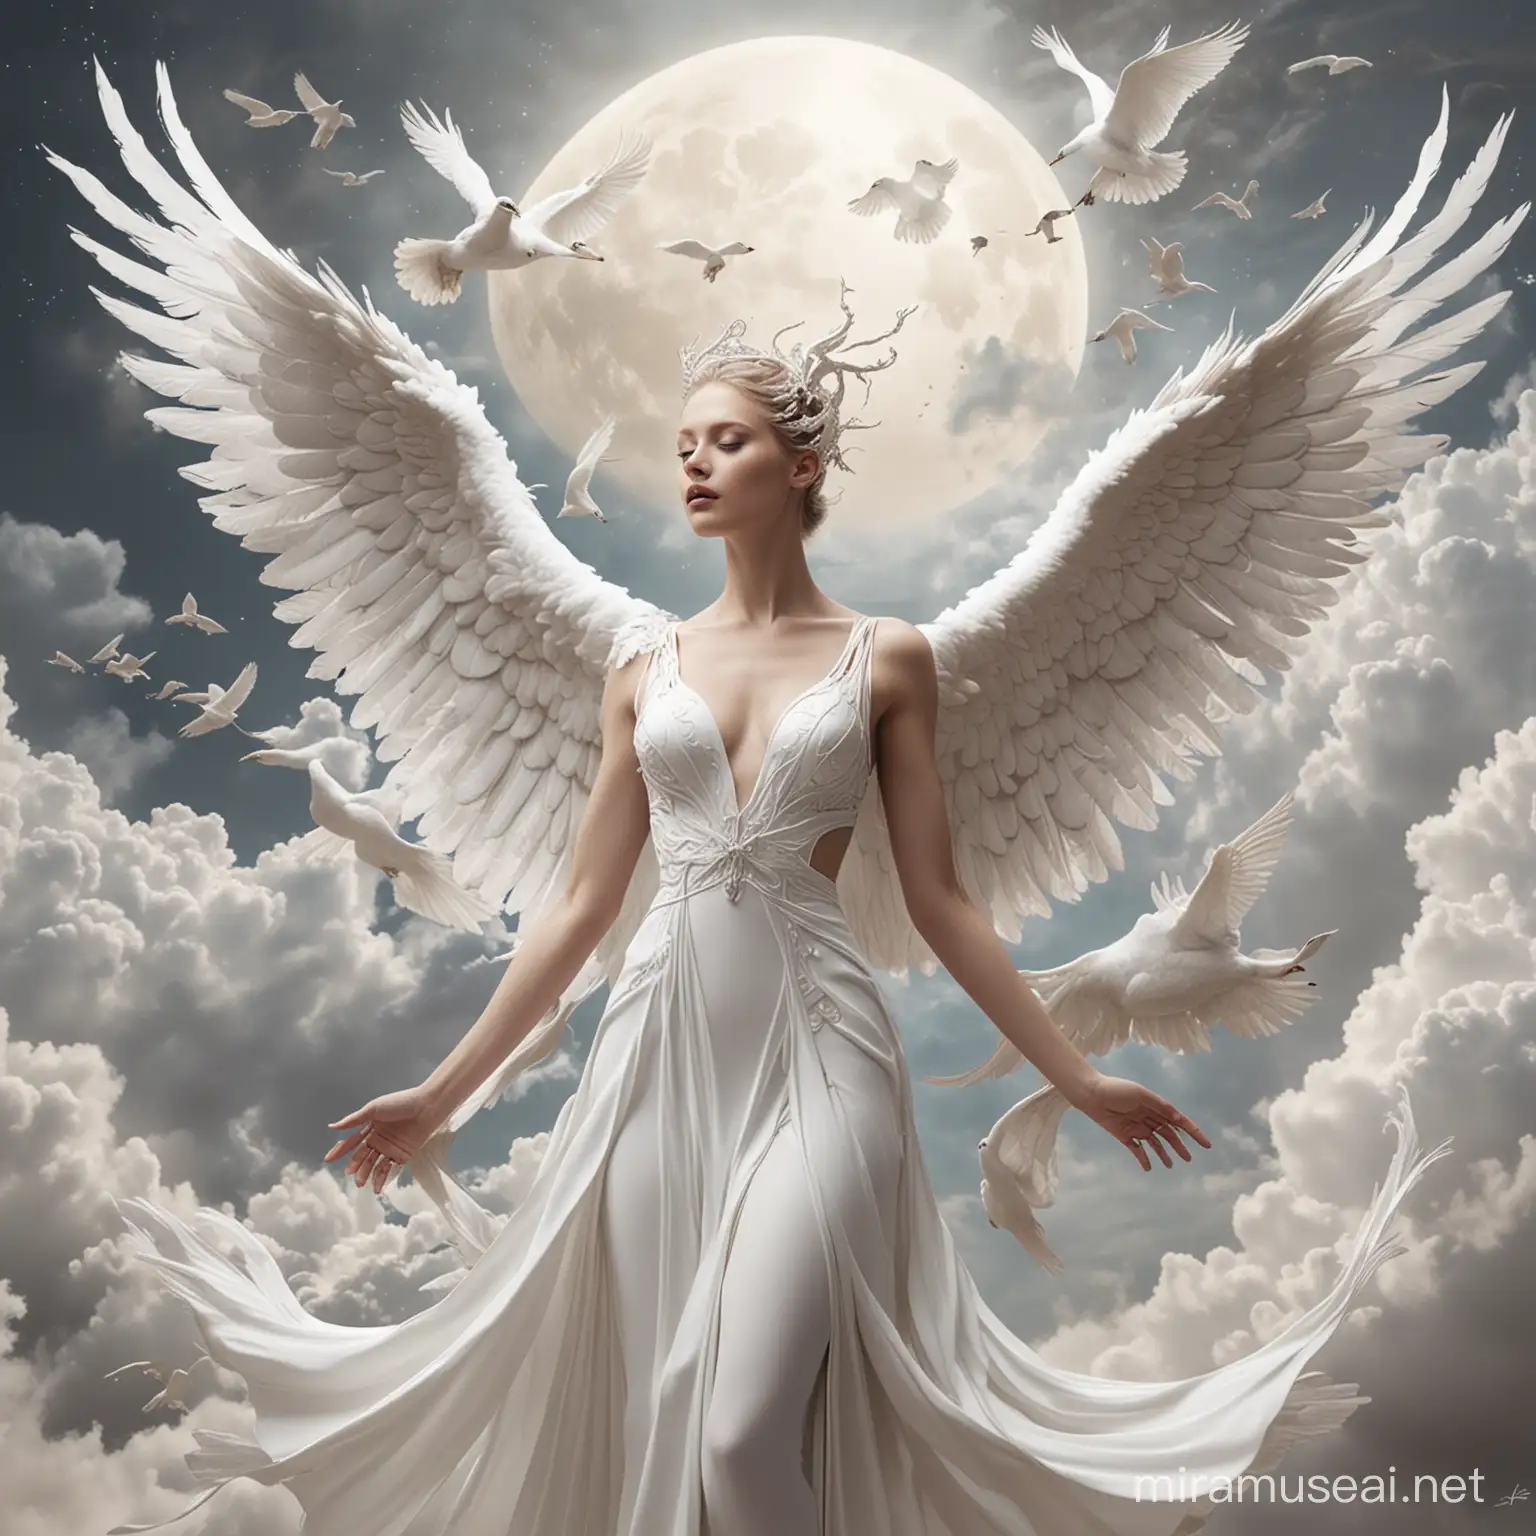 create a mystery concept board showing swan goddess in the form of a celestial bird, roams the skies, her wings casting shadows of enchantment upon the earth below create sespence in white color this is for avant garde collection 